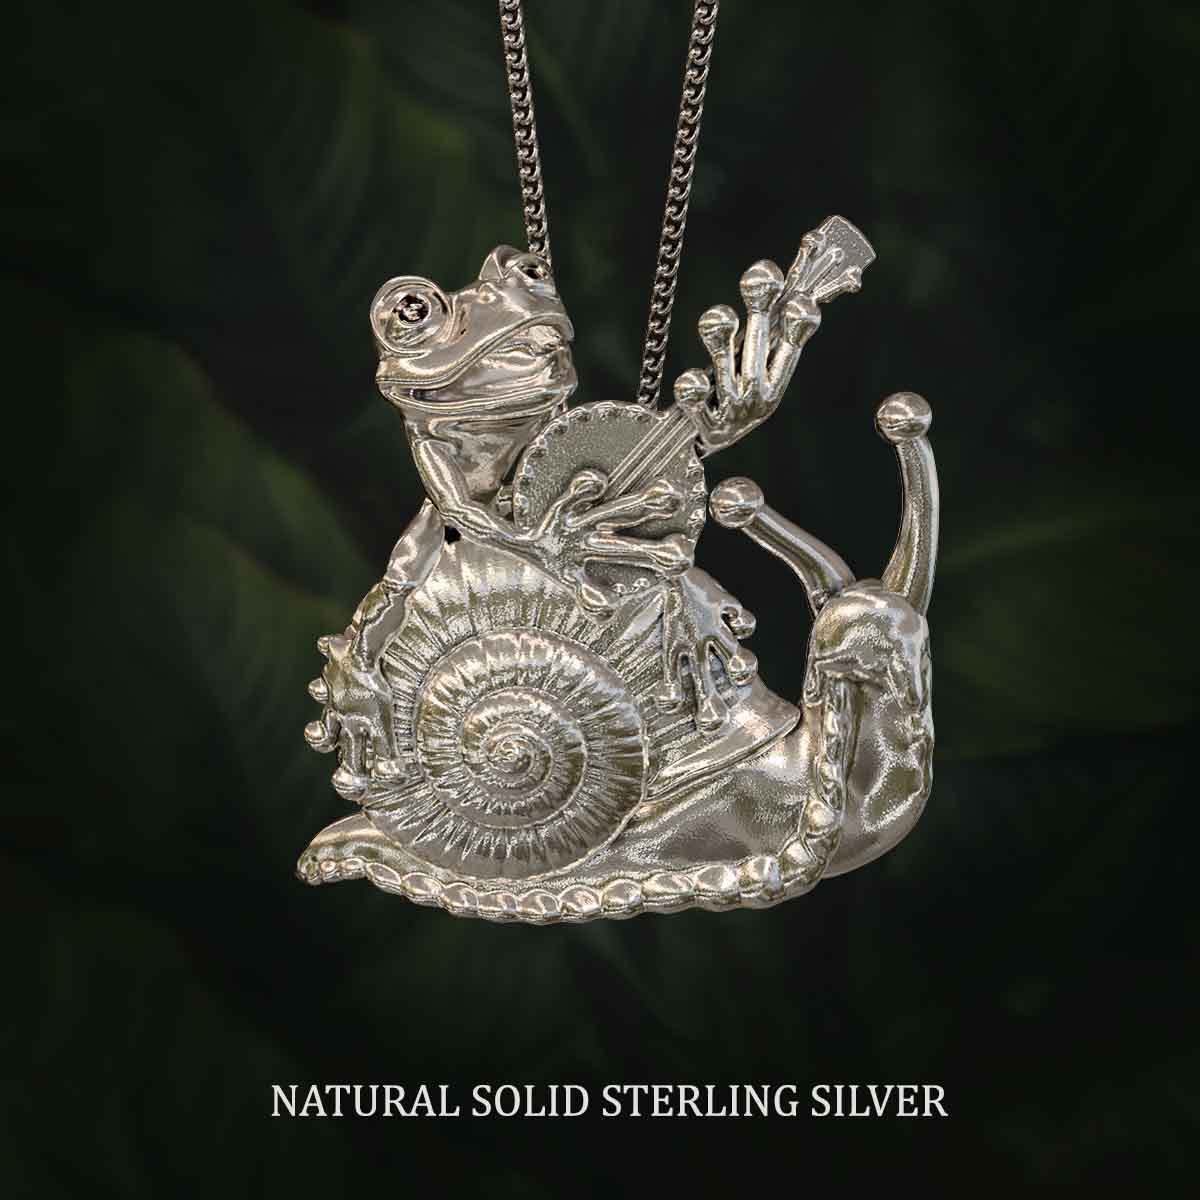 Natural-Satin-Polish-Solid-Sterling-Silver-Serenading-Frog-and-Snail-Pendant-Jewelry-For-Necklace